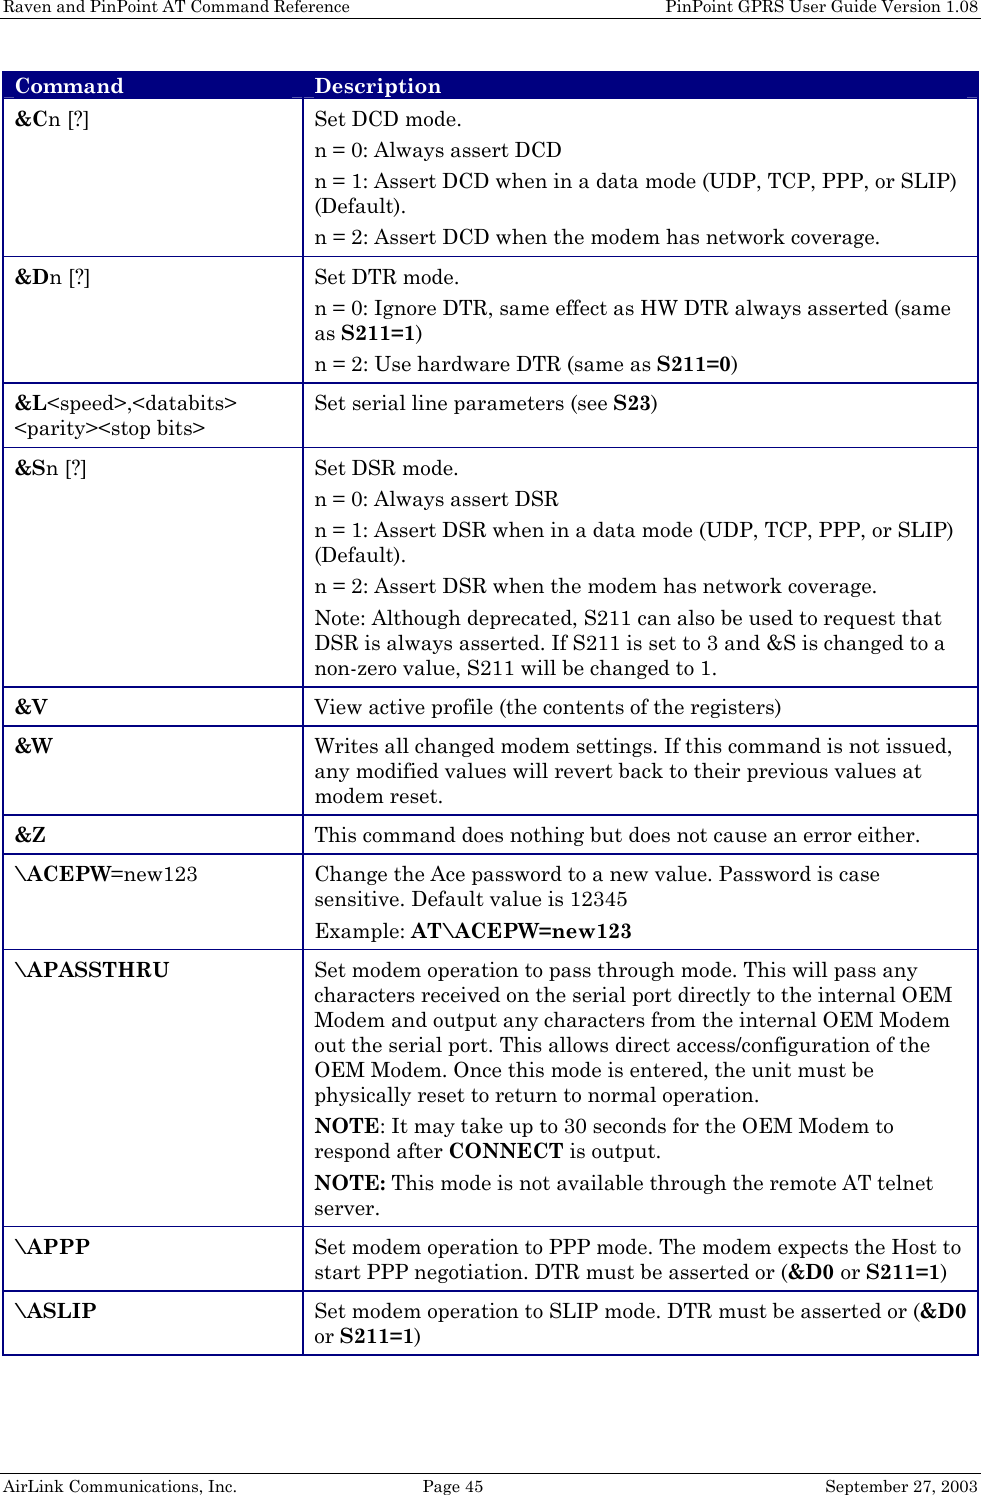 Raven and PinPoint AT Command Reference    PinPoint GPRS User Guide Version 1.08 AirLink Communications, Inc.  Page 45  September 27, 2003 Command Description &amp;Cn [?] Set DCD mode.  n = 0: Always assert DCD n = 1: Assert DCD when in a data mode (UDP, TCP, PPP, or SLIP) (Default). n = 2: Assert DCD when the modem has network coverage. &amp;Dn [?] Set DTR mode. n = 0: Ignore DTR, same effect as HW DTR always asserted (same as S211=1) n = 2: Use hardware DTR (same as S211=0)  &amp;L&lt;speed&gt;,&lt;databits&gt; &lt;parity&gt;&lt;stop bits&gt; Set serial line parameters (see S23) &amp;Sn [?] Set DSR mode. n = 0: Always assert DSR n = 1: Assert DSR when in a data mode (UDP, TCP, PPP, or SLIP) (Default). n = 2: Assert DSR when the modem has network coverage. Note: Although deprecated, S211 can also be used to request that DSR is always asserted. If S211 is set to 3 and &amp;S is changed to a non-zero value, S211 will be changed to 1. &amp;V View active profile (the contents of the registers) &amp;W Writes all changed modem settings. If this command is not issued, any modified values will revert back to their previous values at modem reset. &amp;Z This command does nothing but does not cause an error either. \ACEPW=new123 Change the Ace password to a new value. Password is case sensitive. Default value is 12345 Example: AT\ACEPW=new123 \APASSTHRU Set modem operation to pass through mode. This will pass any characters received on the serial port directly to the internal OEM Modem and output any characters from the internal OEM Modem out the serial port. This allows direct access/configuration of the OEM Modem. Once this mode is entered, the unit must be physically reset to return to normal operation. NOTE: It may take up to 30 seconds for the OEM Modem to respond after CONNECT is output. NOTE: This mode is not available through the remote AT telnet server. \APPP Set modem operation to PPP mode. The modem expects the Host to start PPP negotiation. DTR must be asserted or (&amp;D0 or S211=1) \ASLIP Set modem operation to SLIP mode. DTR must be asserted or (&amp;D0 or S211=1) 